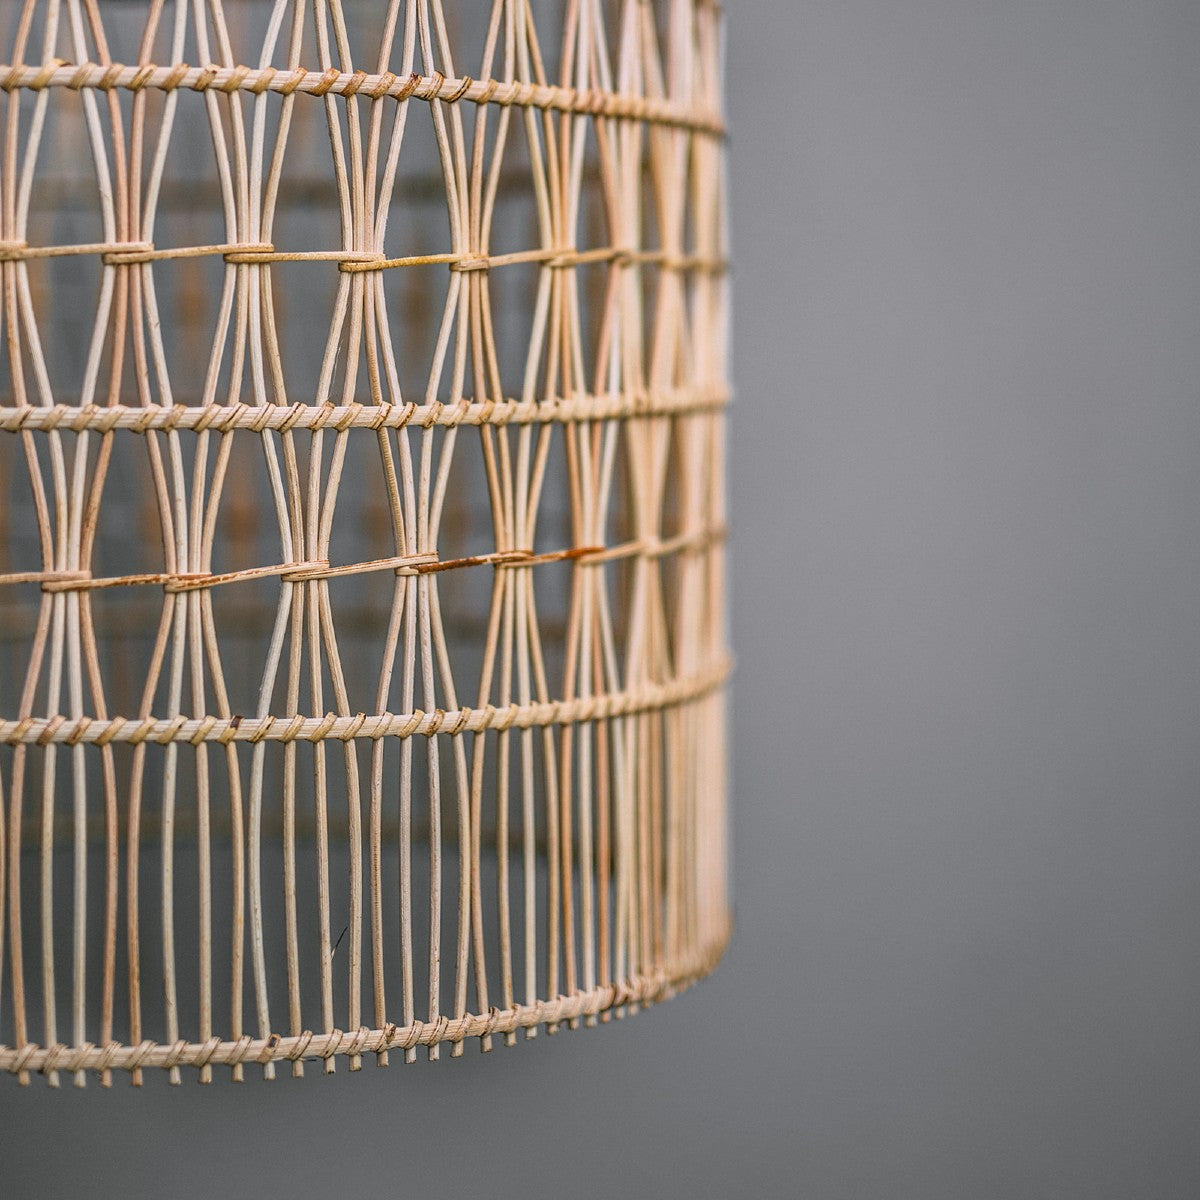 close-up-of-coastal-style-lighting-showing-detail-in-woven-rattan-light-shade-cylindrical. Mediterranean style rattan light shade.